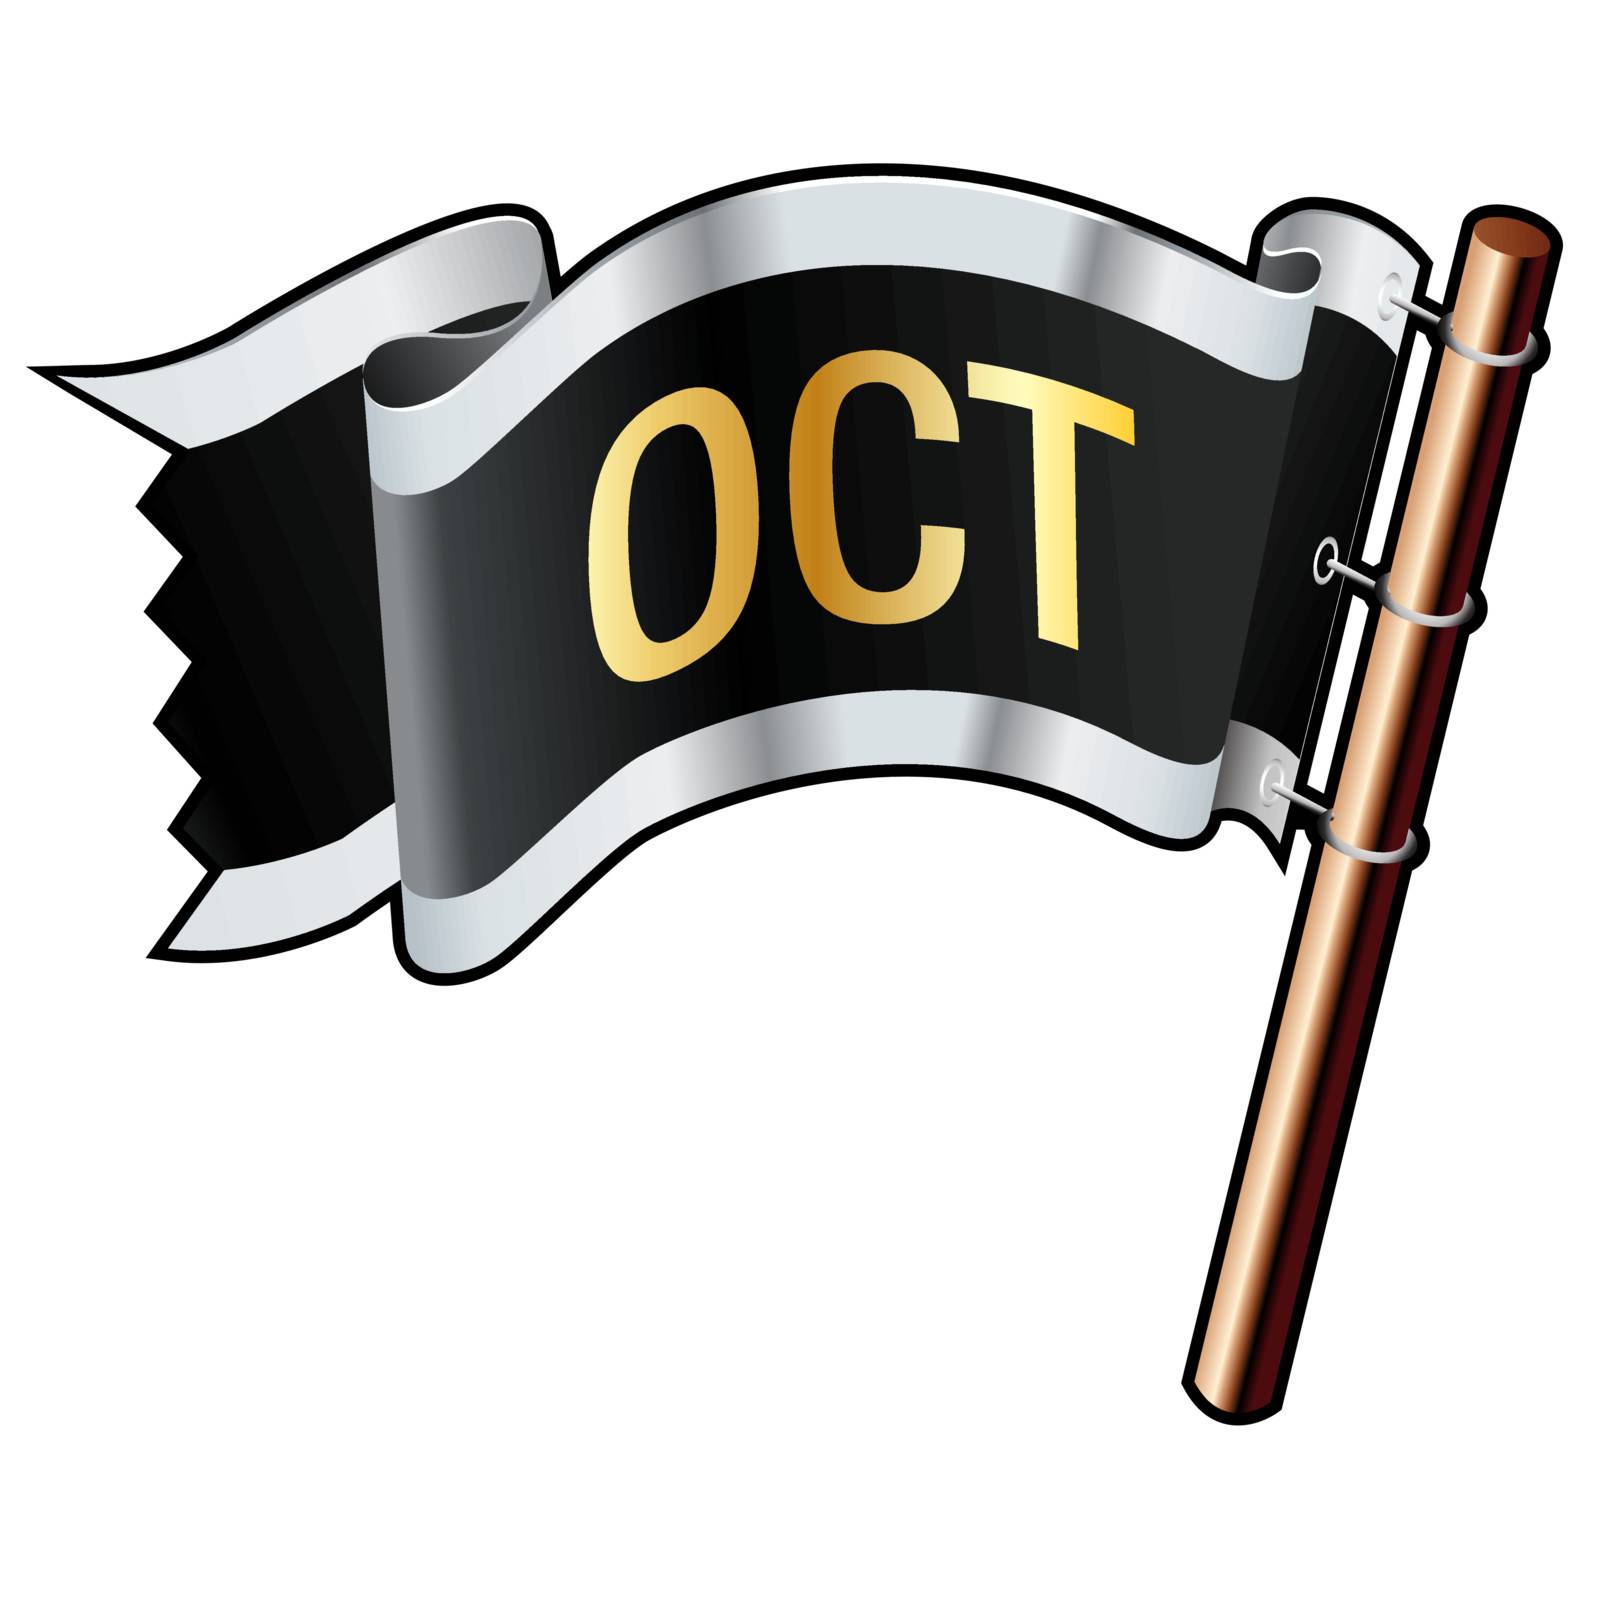 October pirate flag by lhfgraphics